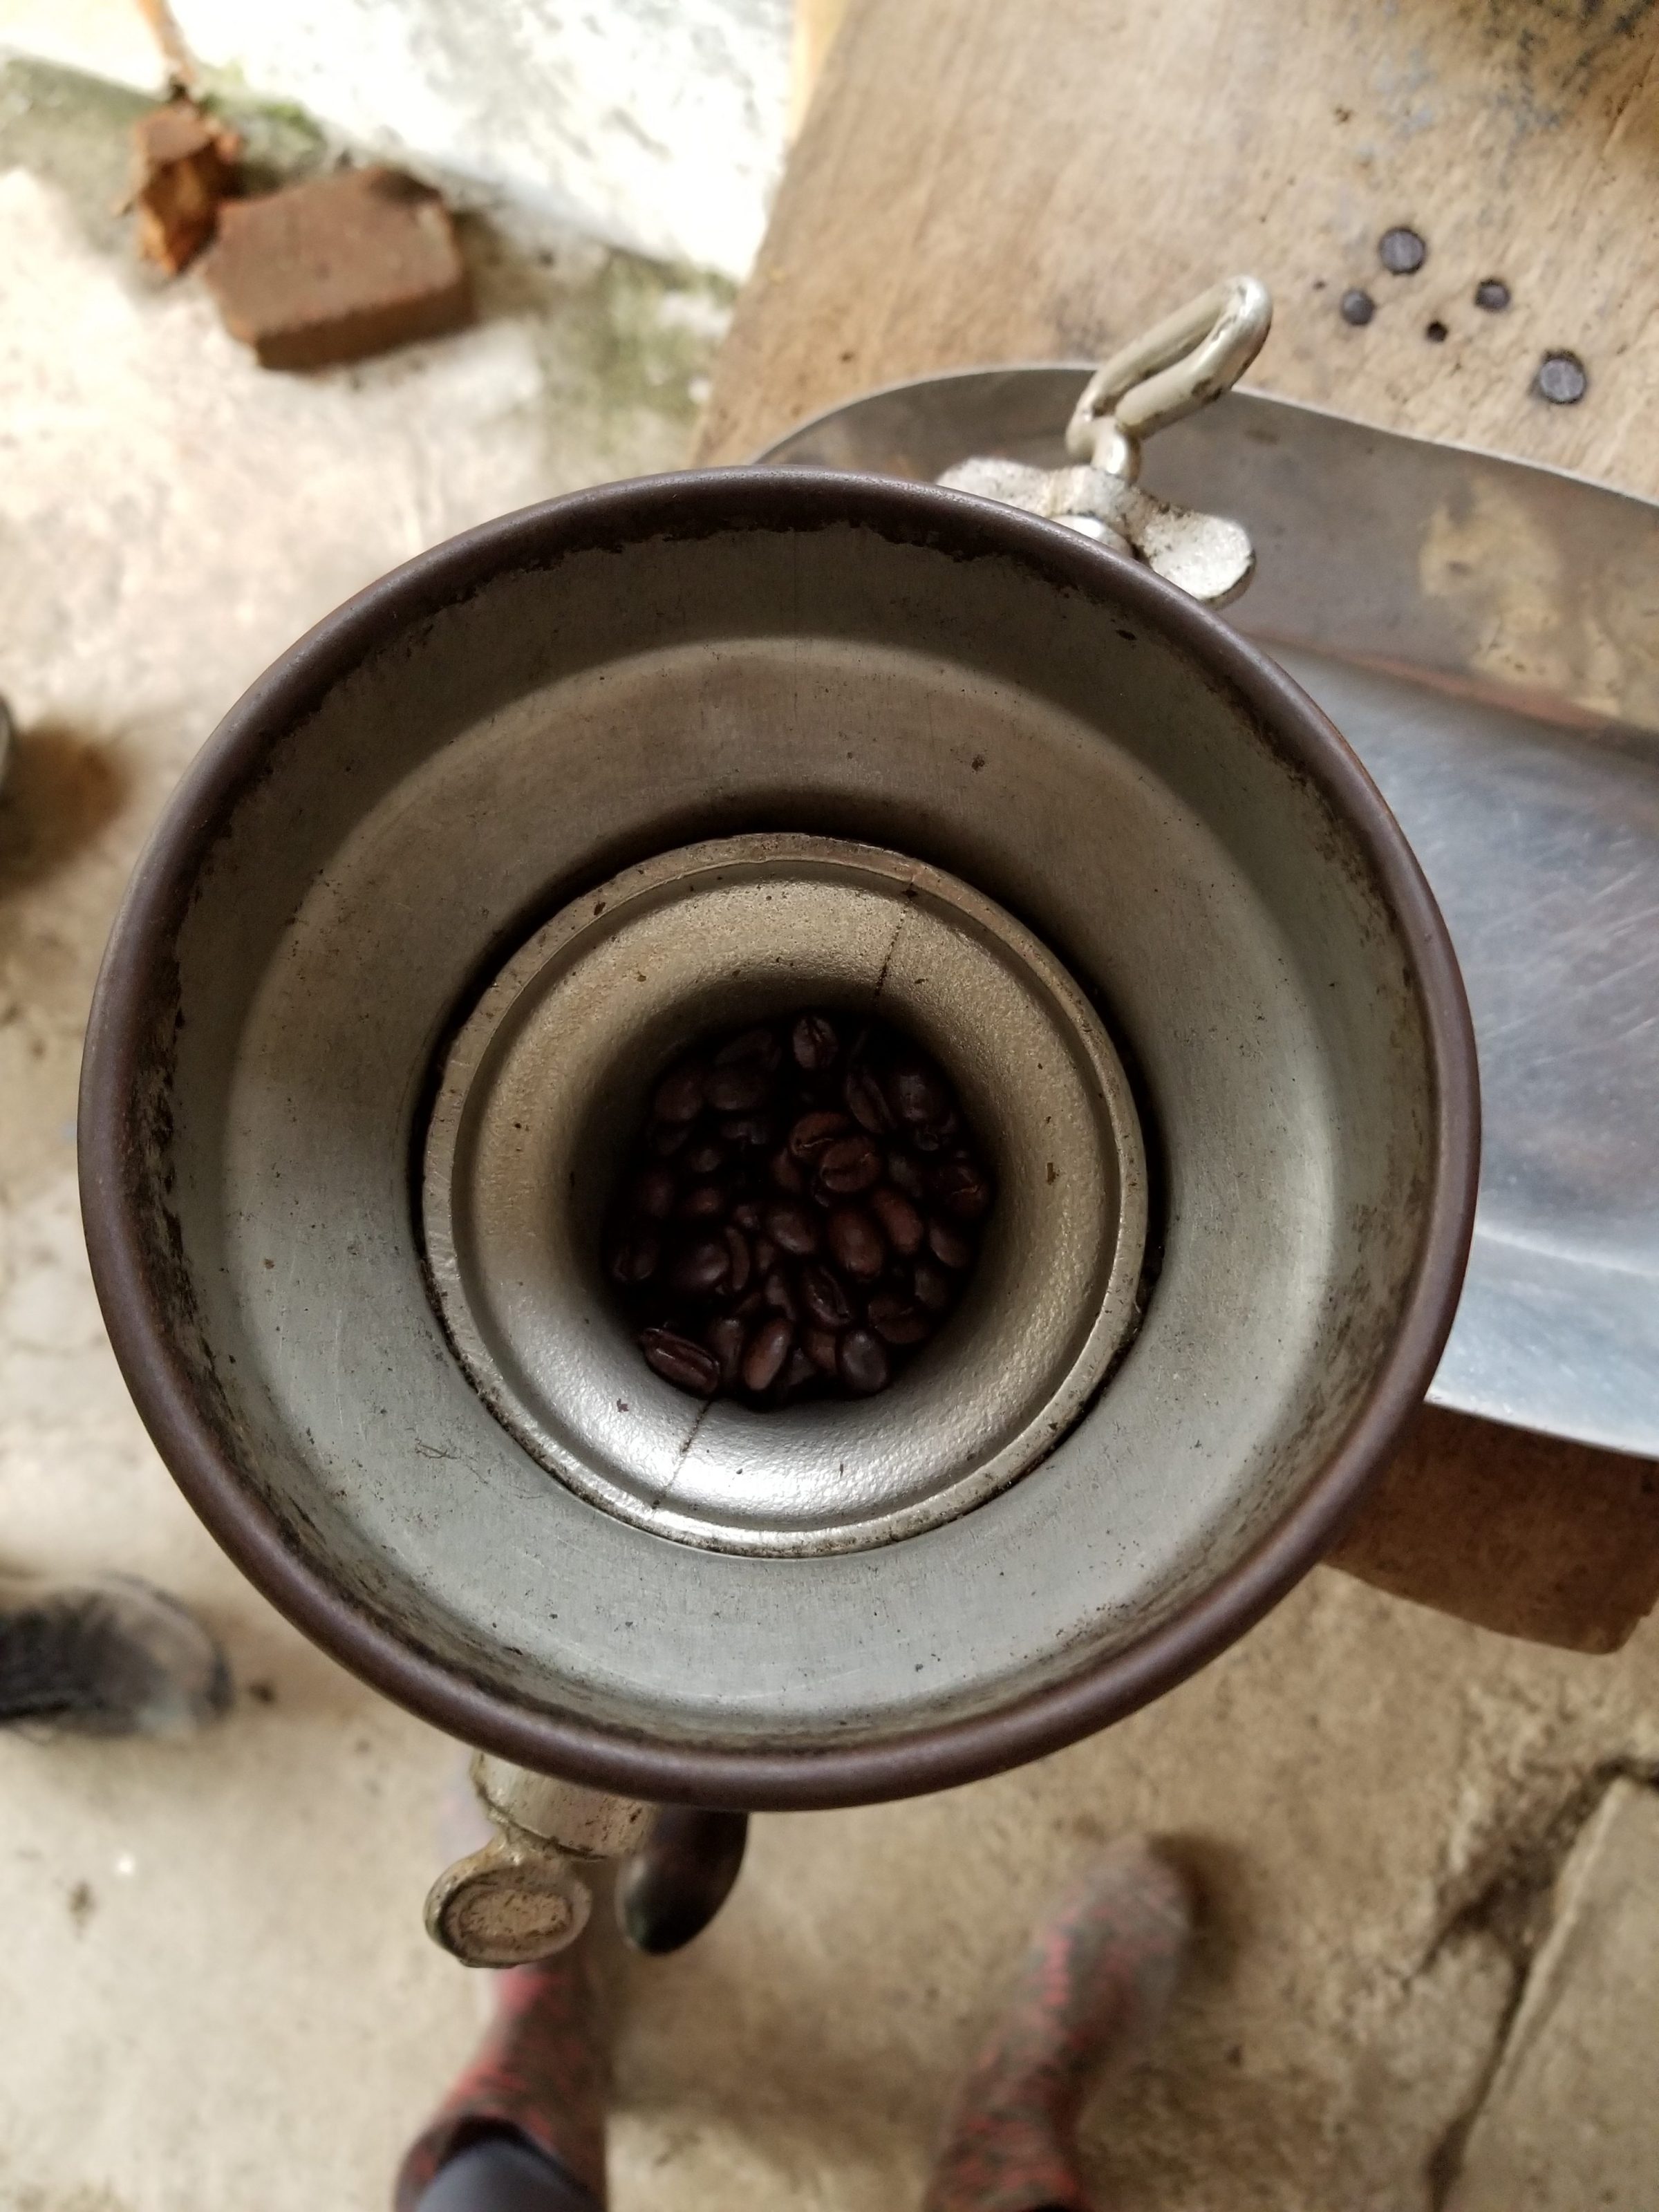 Roasted coffee beans ready for grinding